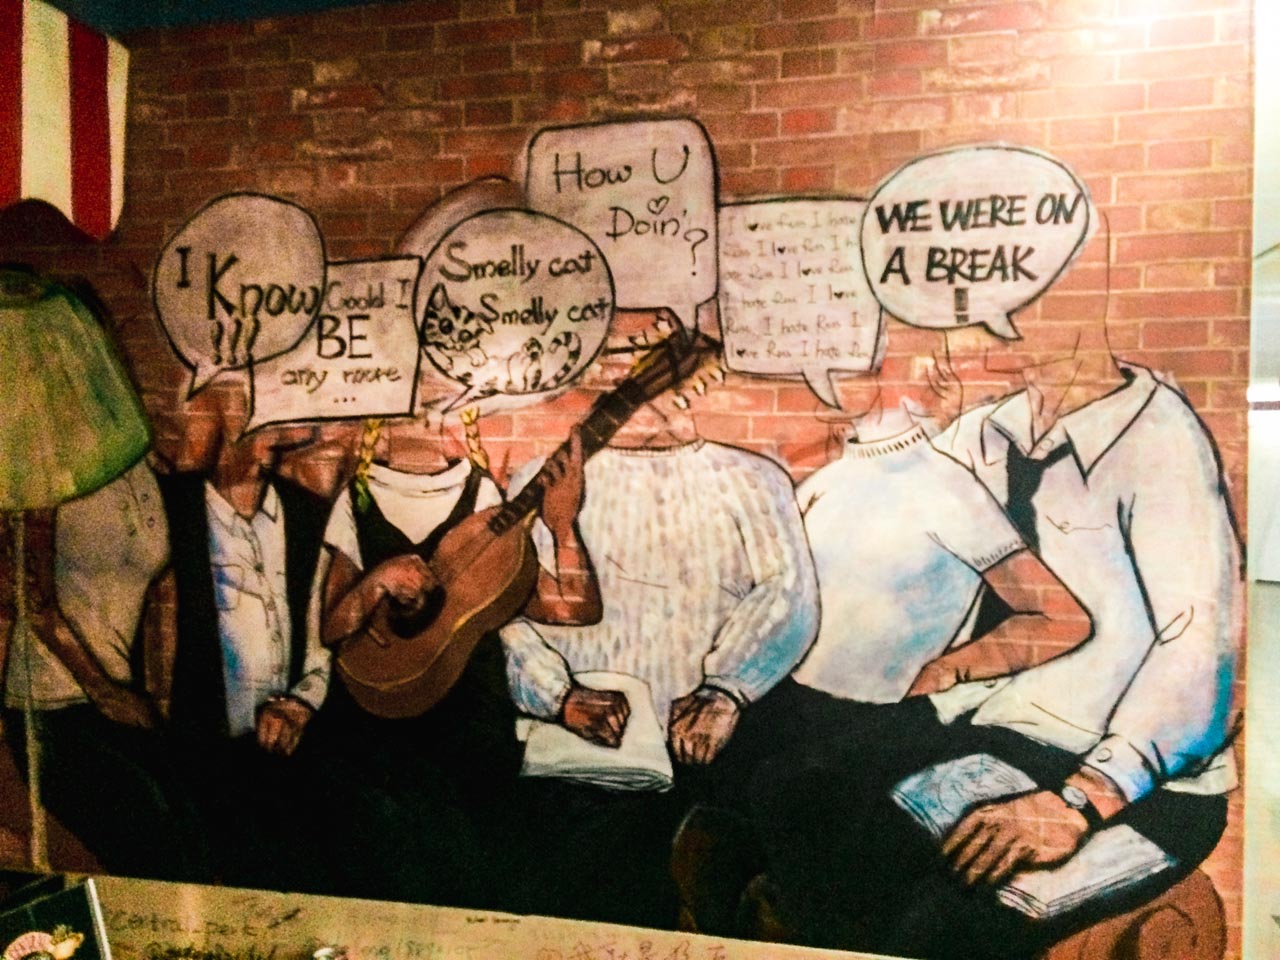 Mural on a brick wall inside the Central Perk café in Beijing, China featuring the main characters